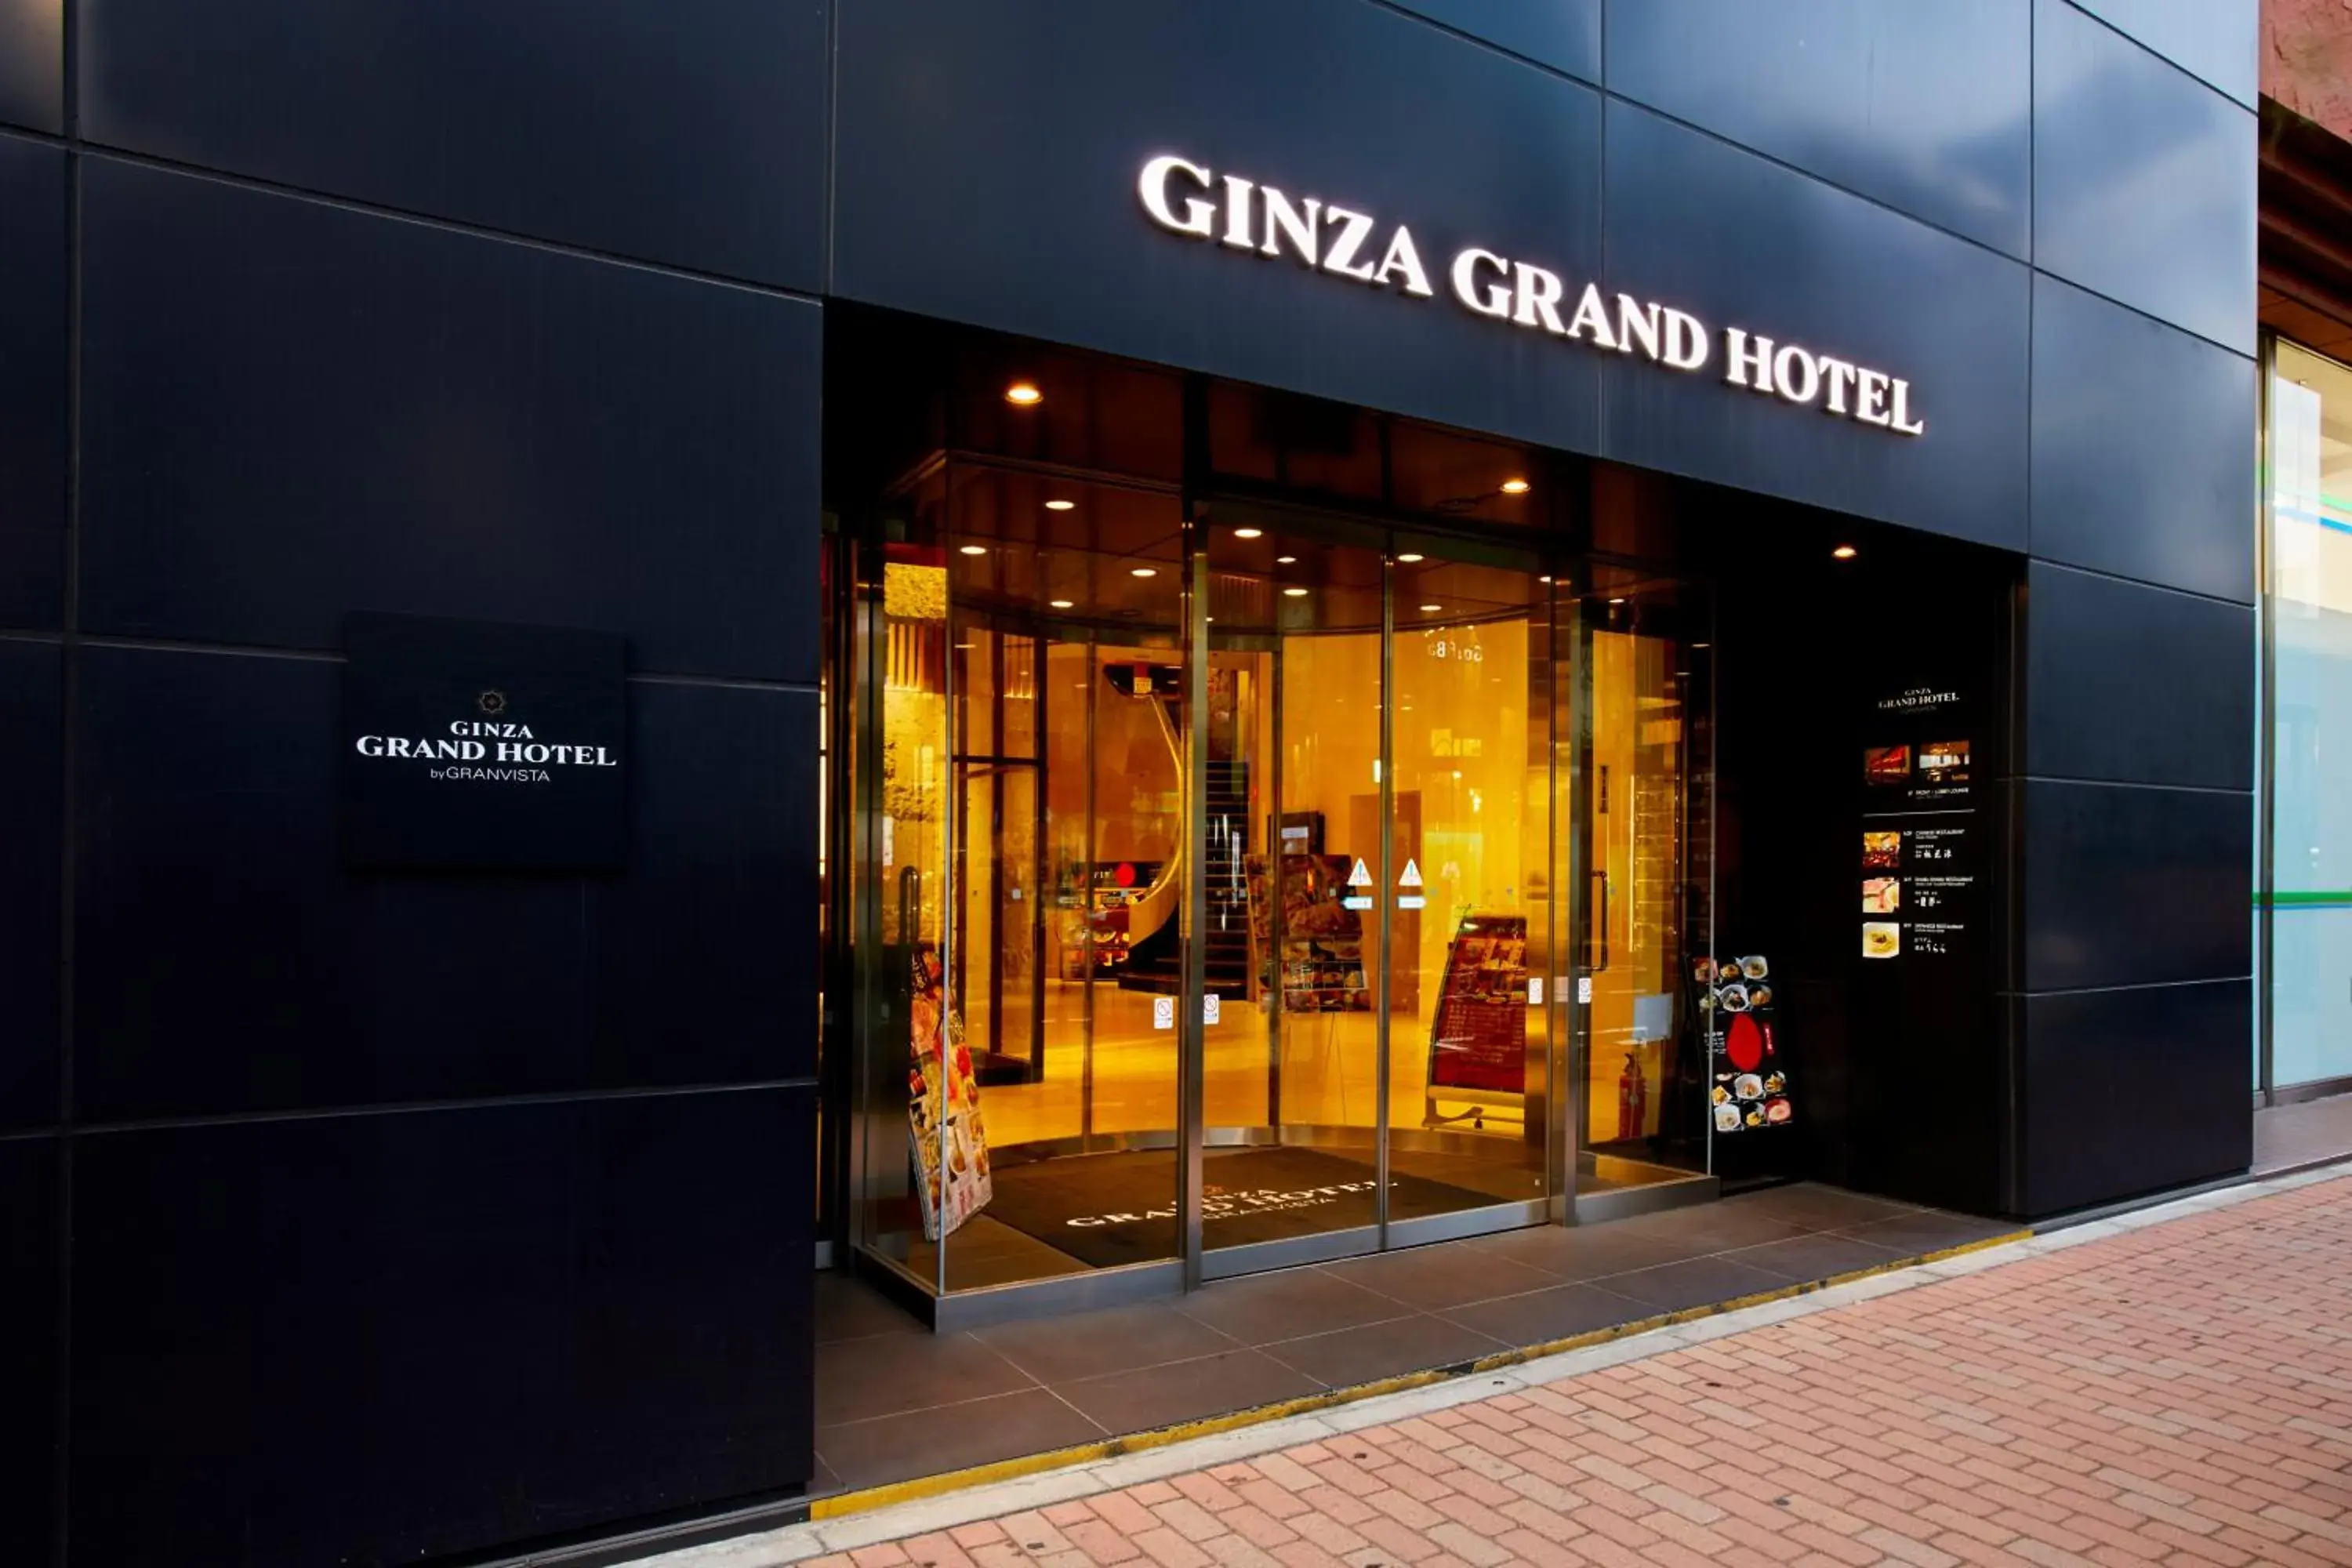 Property building in Ginza Grand Hotel